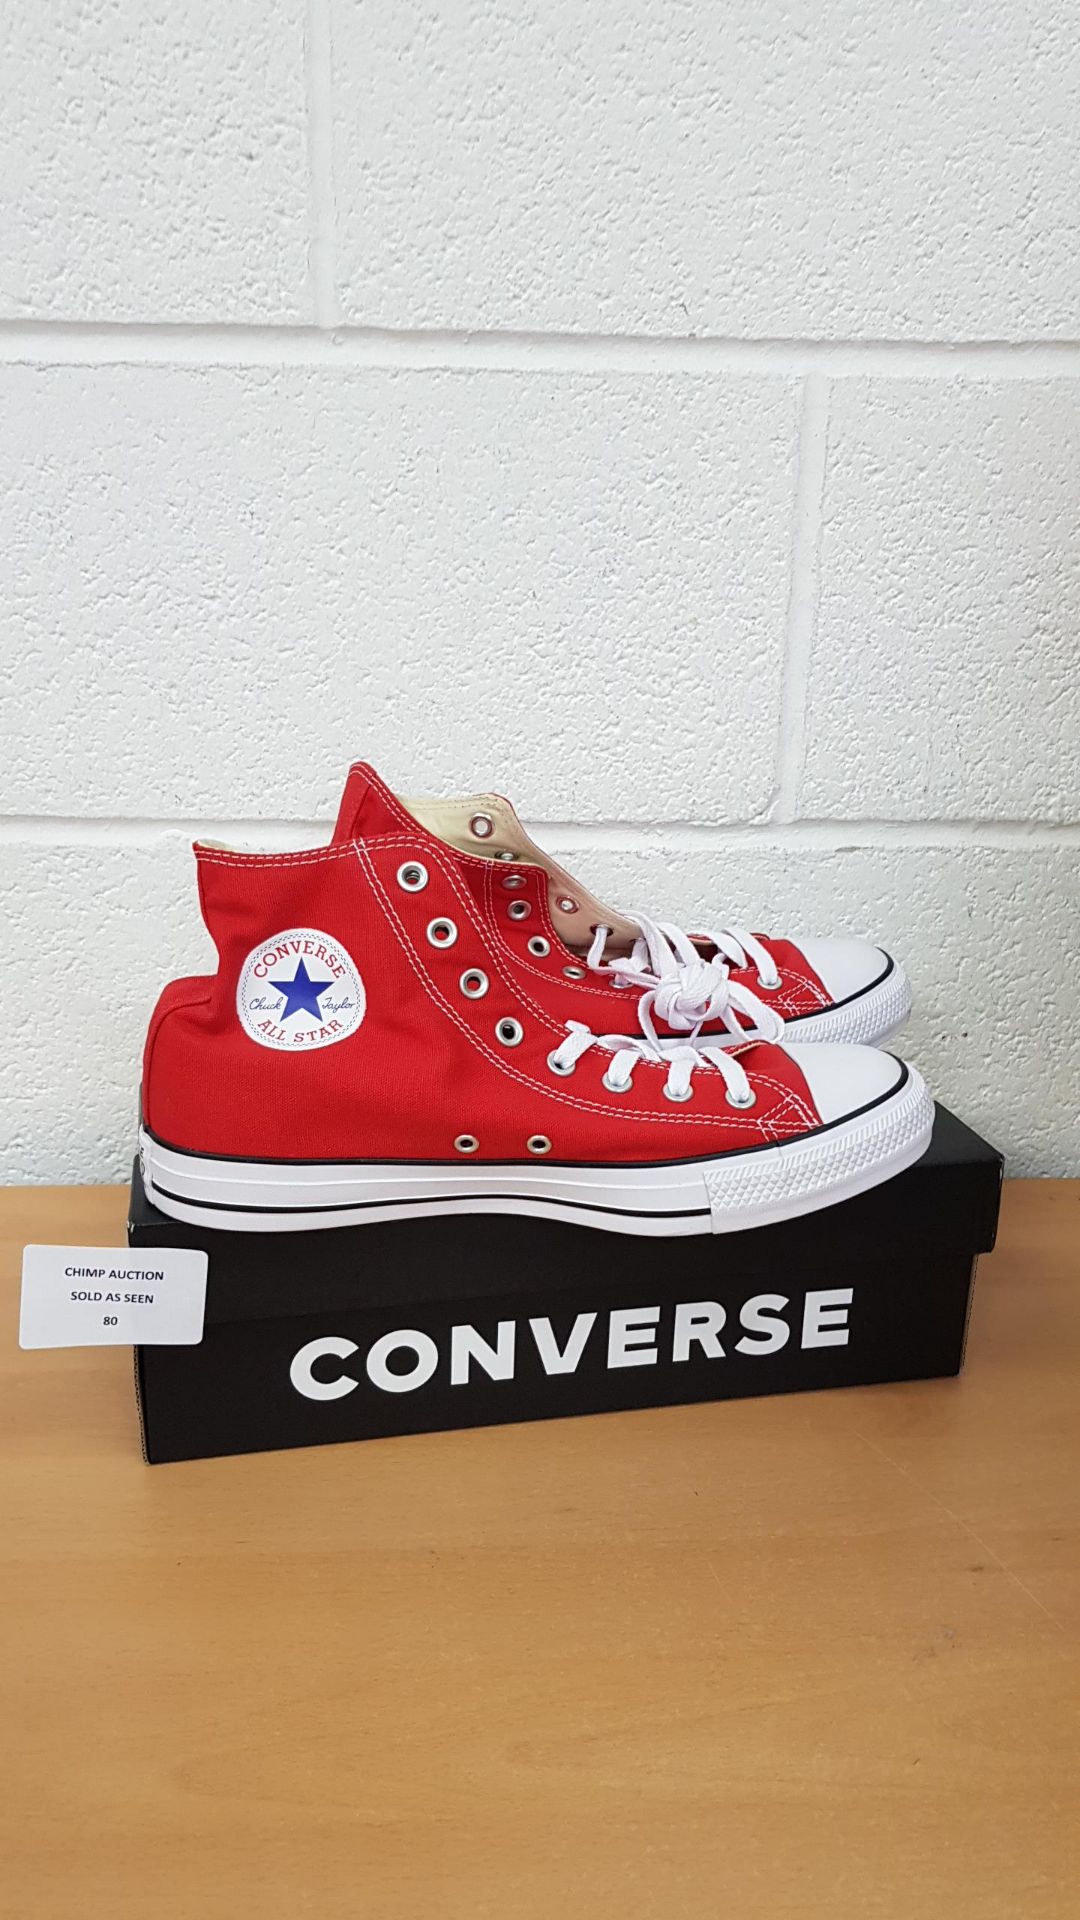 Converse All stars unisex shoes UK 9